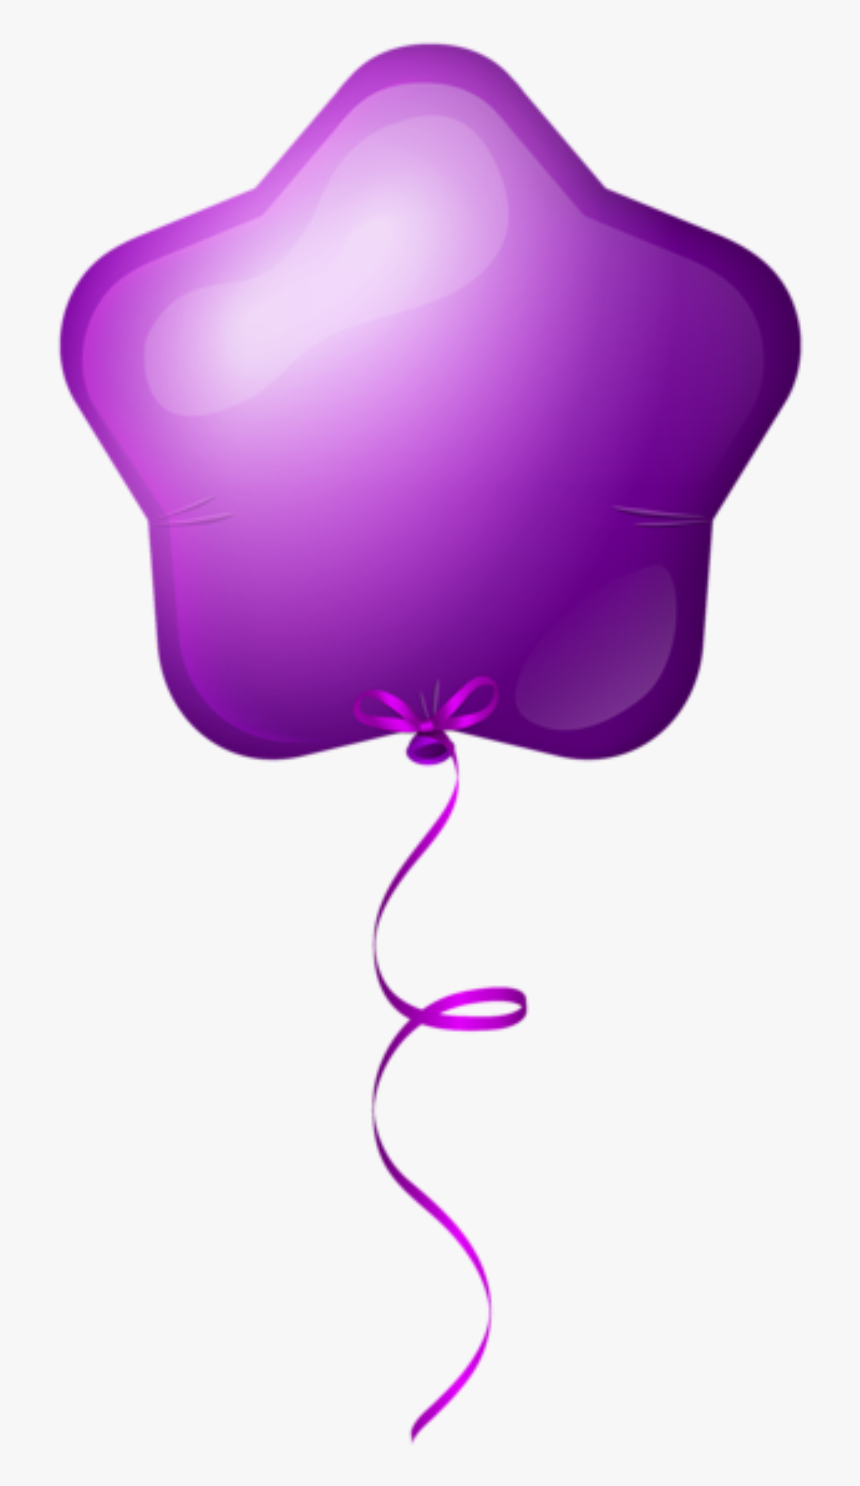 Single Birthday Balloons Png, Transparent Png, Free Download